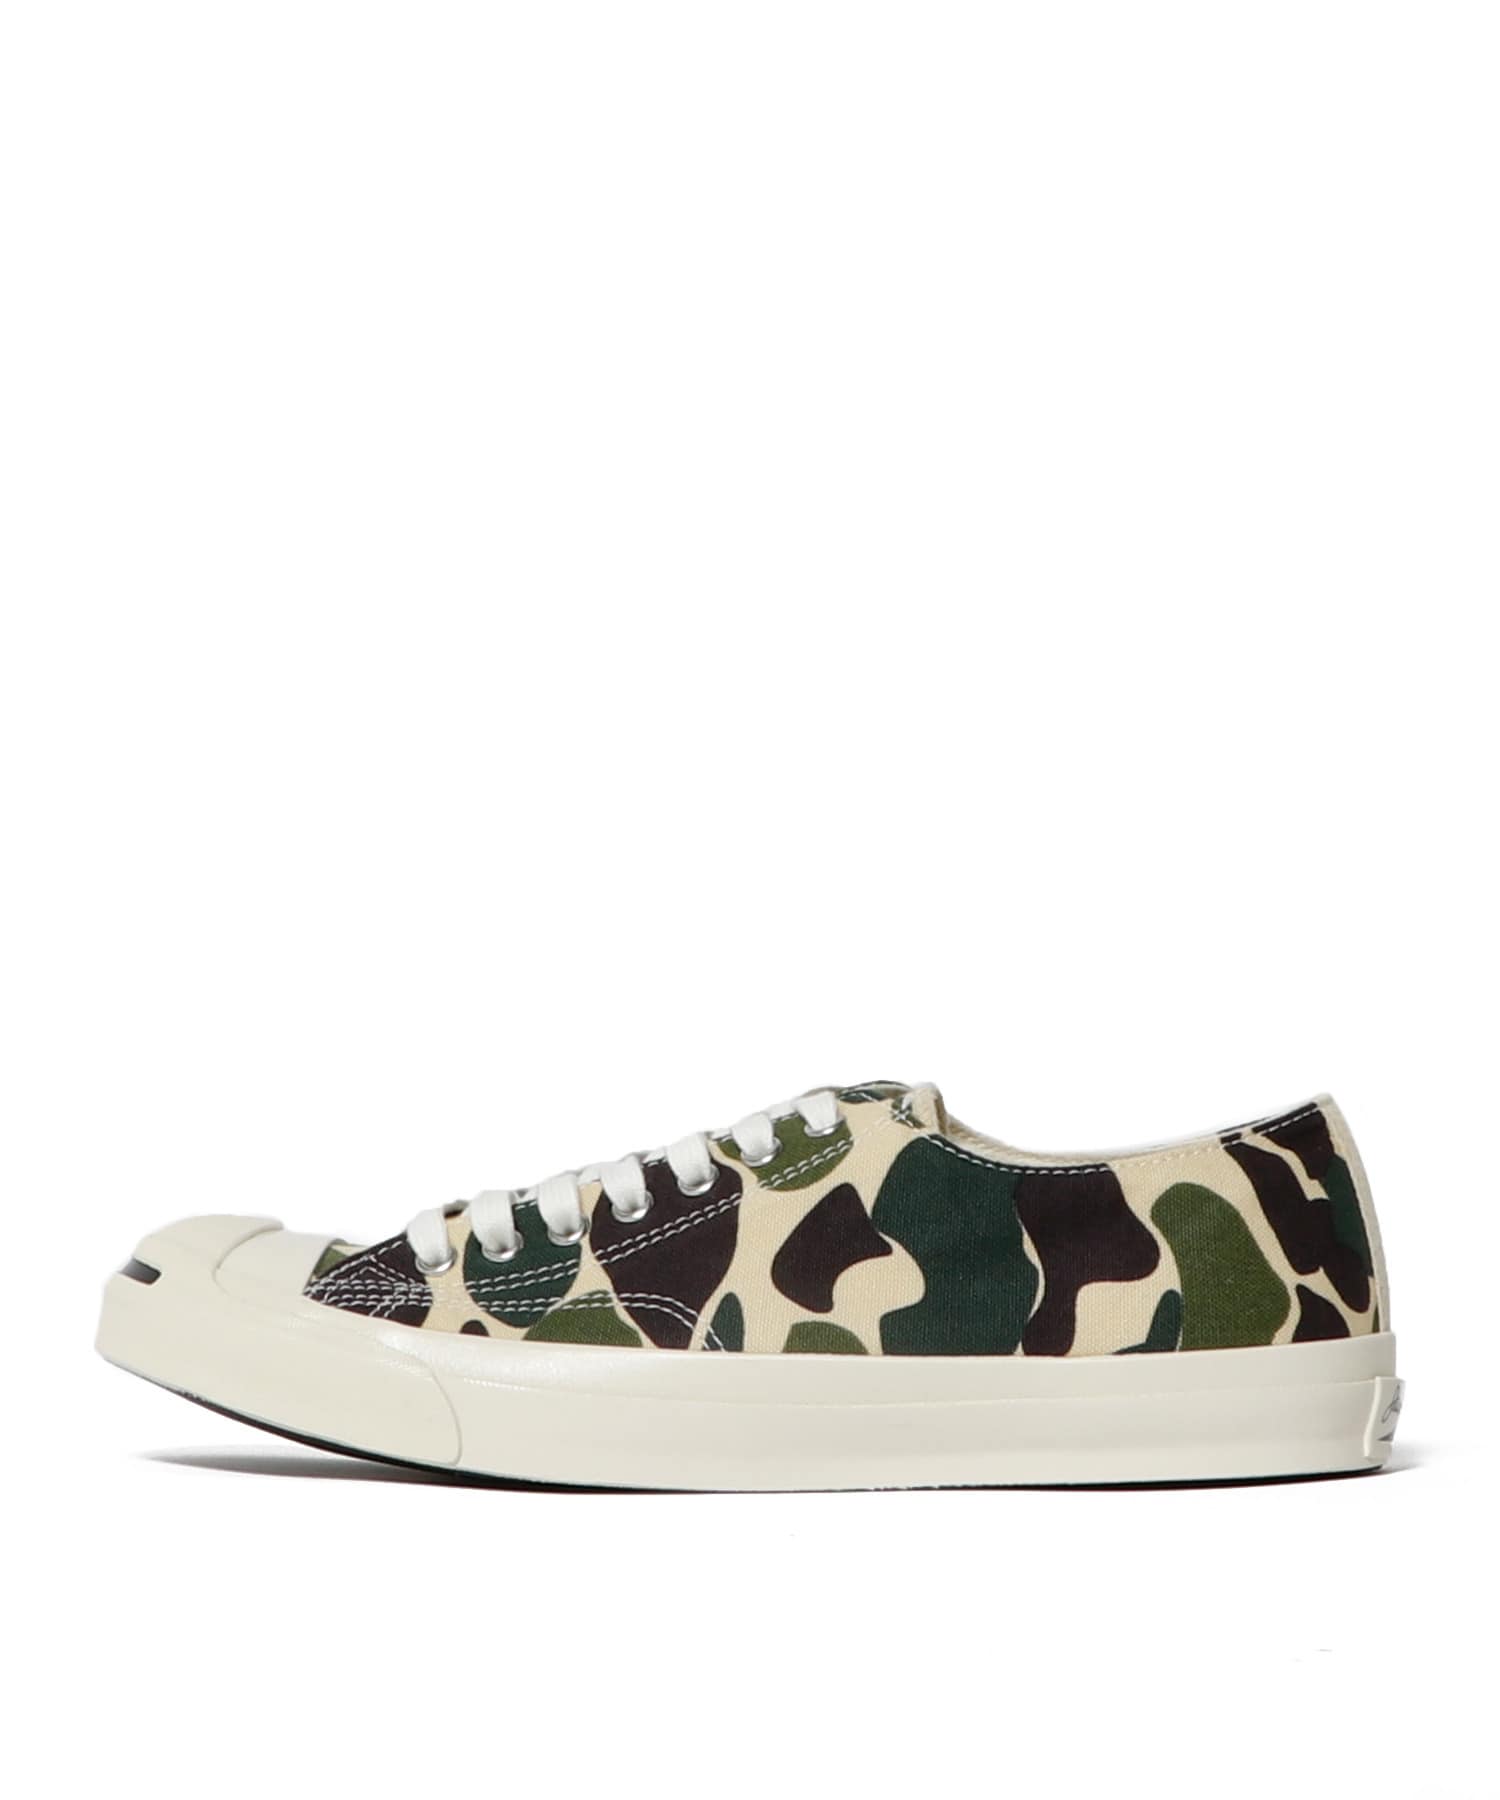 JACK PURCELL US 83CAMO 詳細画像 オリーブ 1